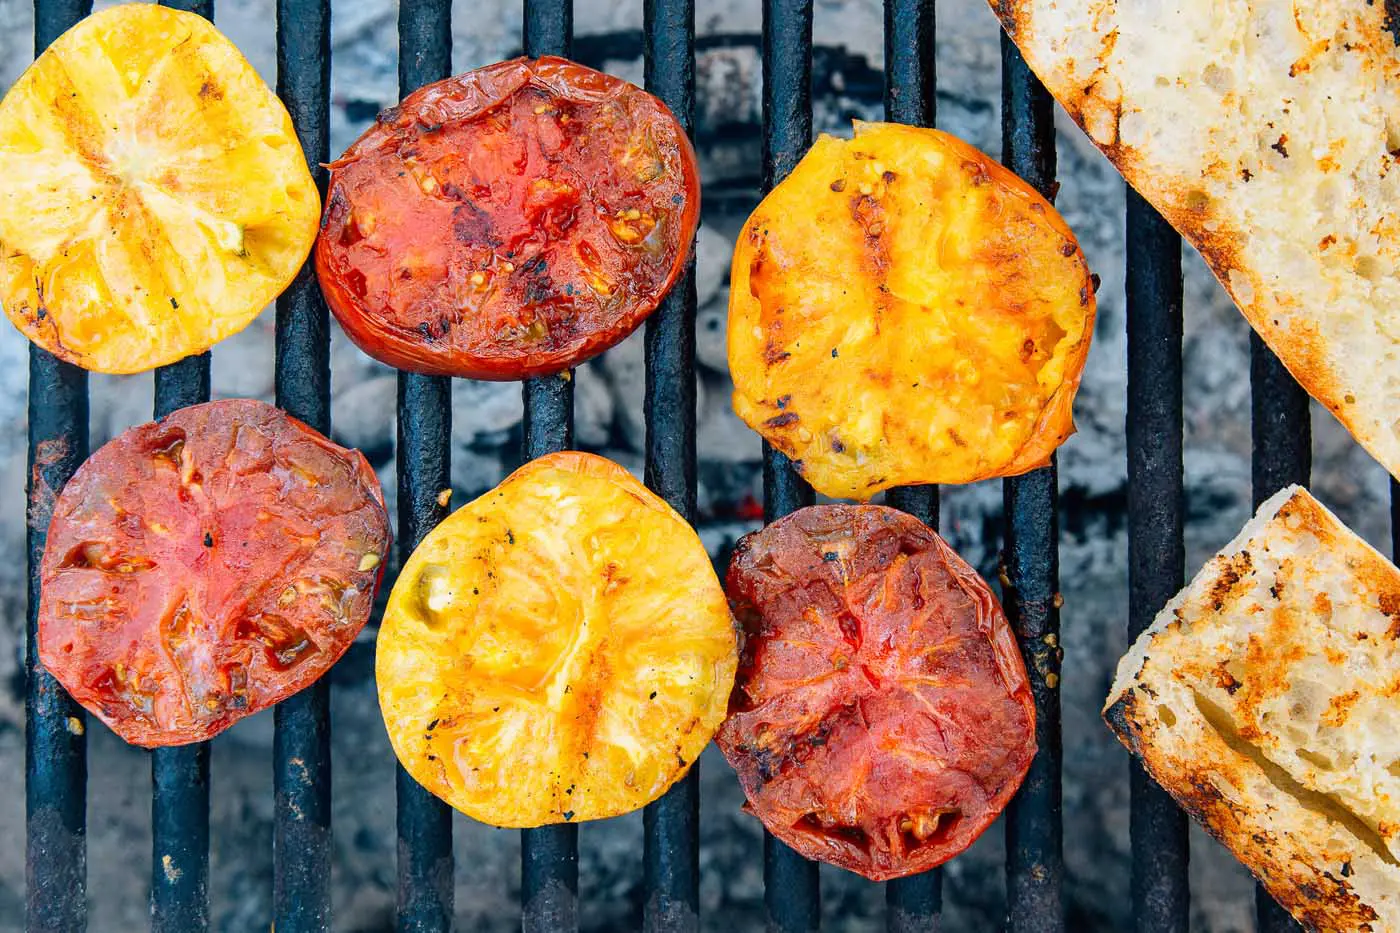 Grilling tomatoes over a campfire